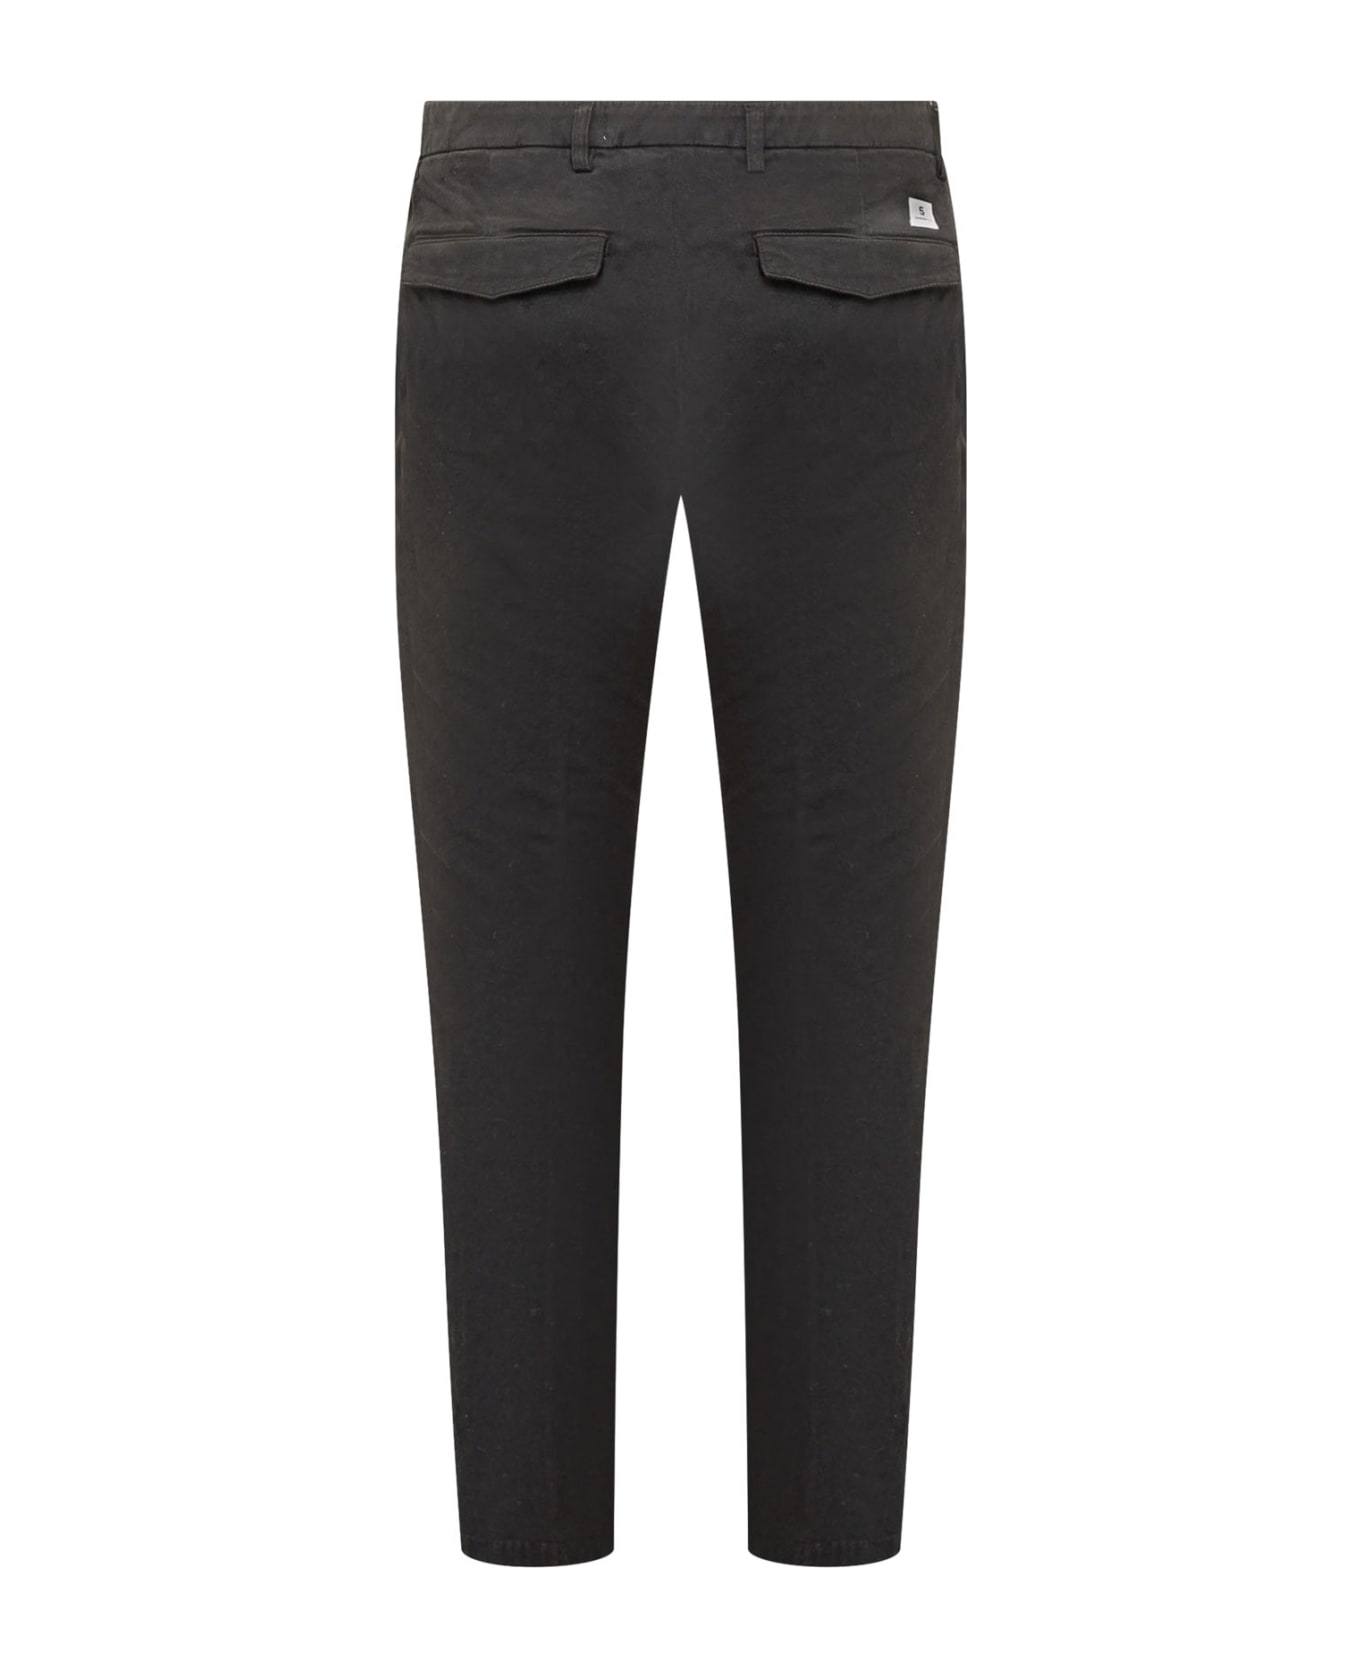 Department Five Prince Trousers Chinos - NERO